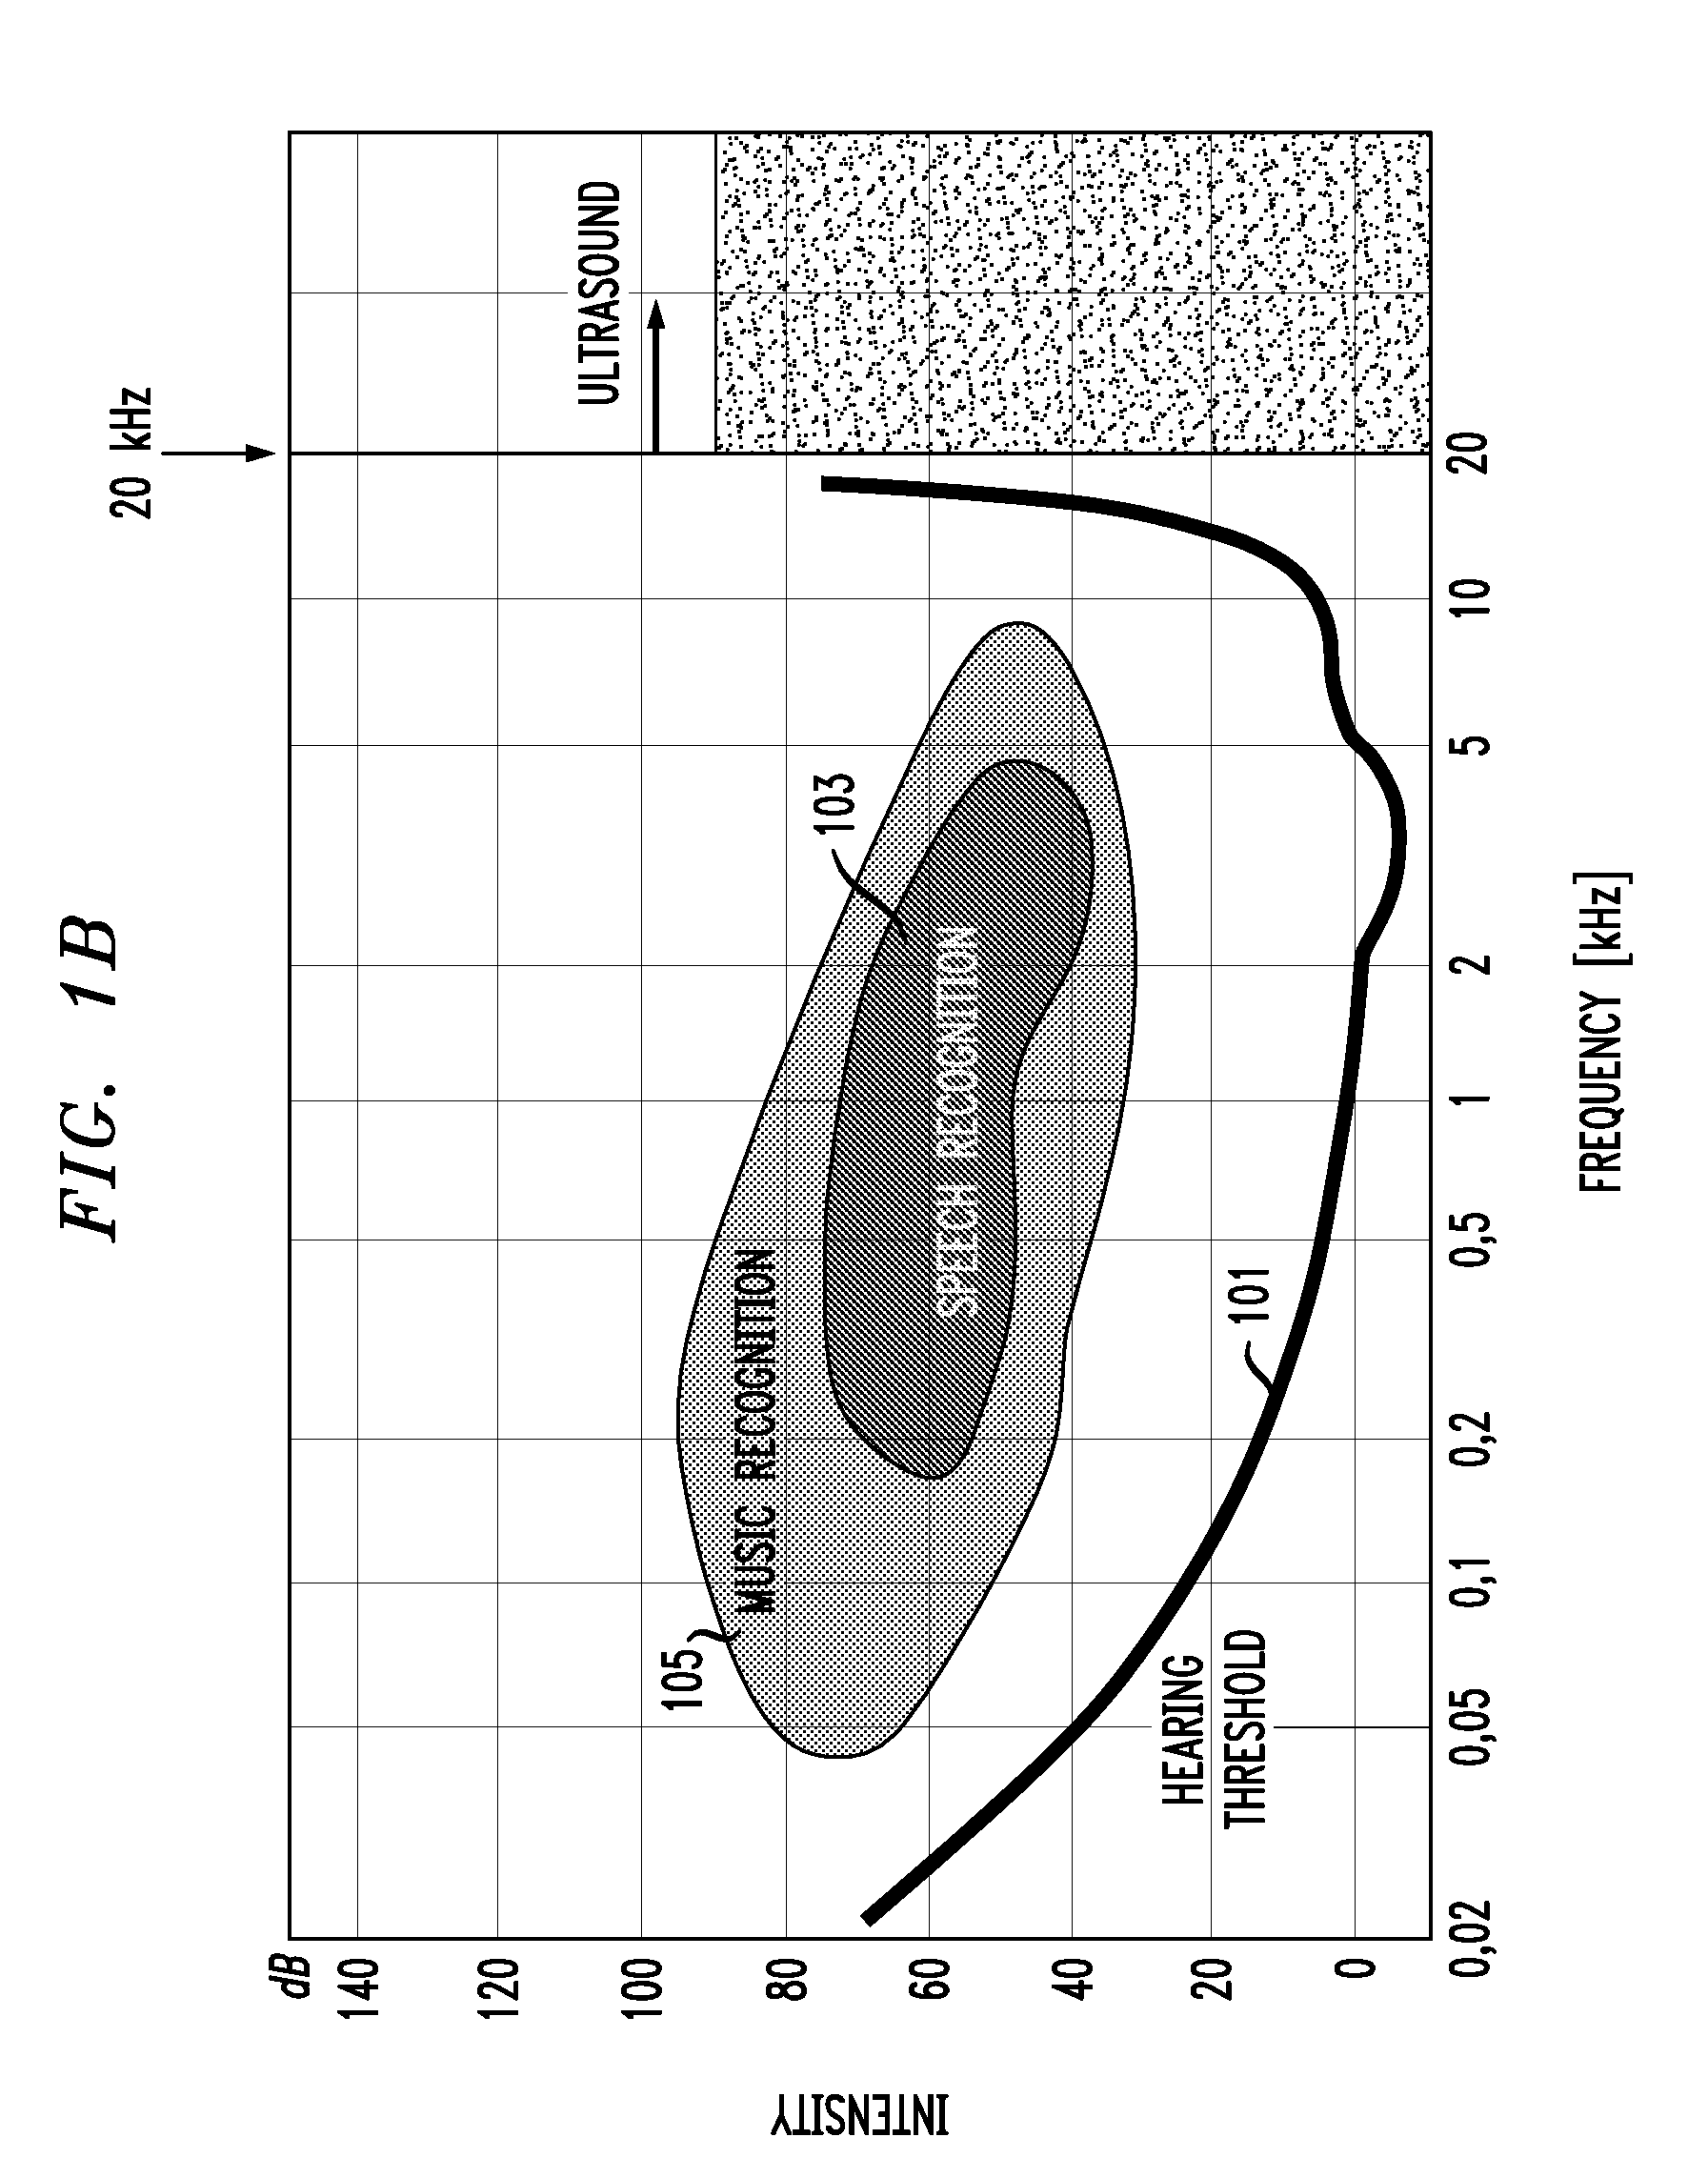 Voice-estimation interface and communication system